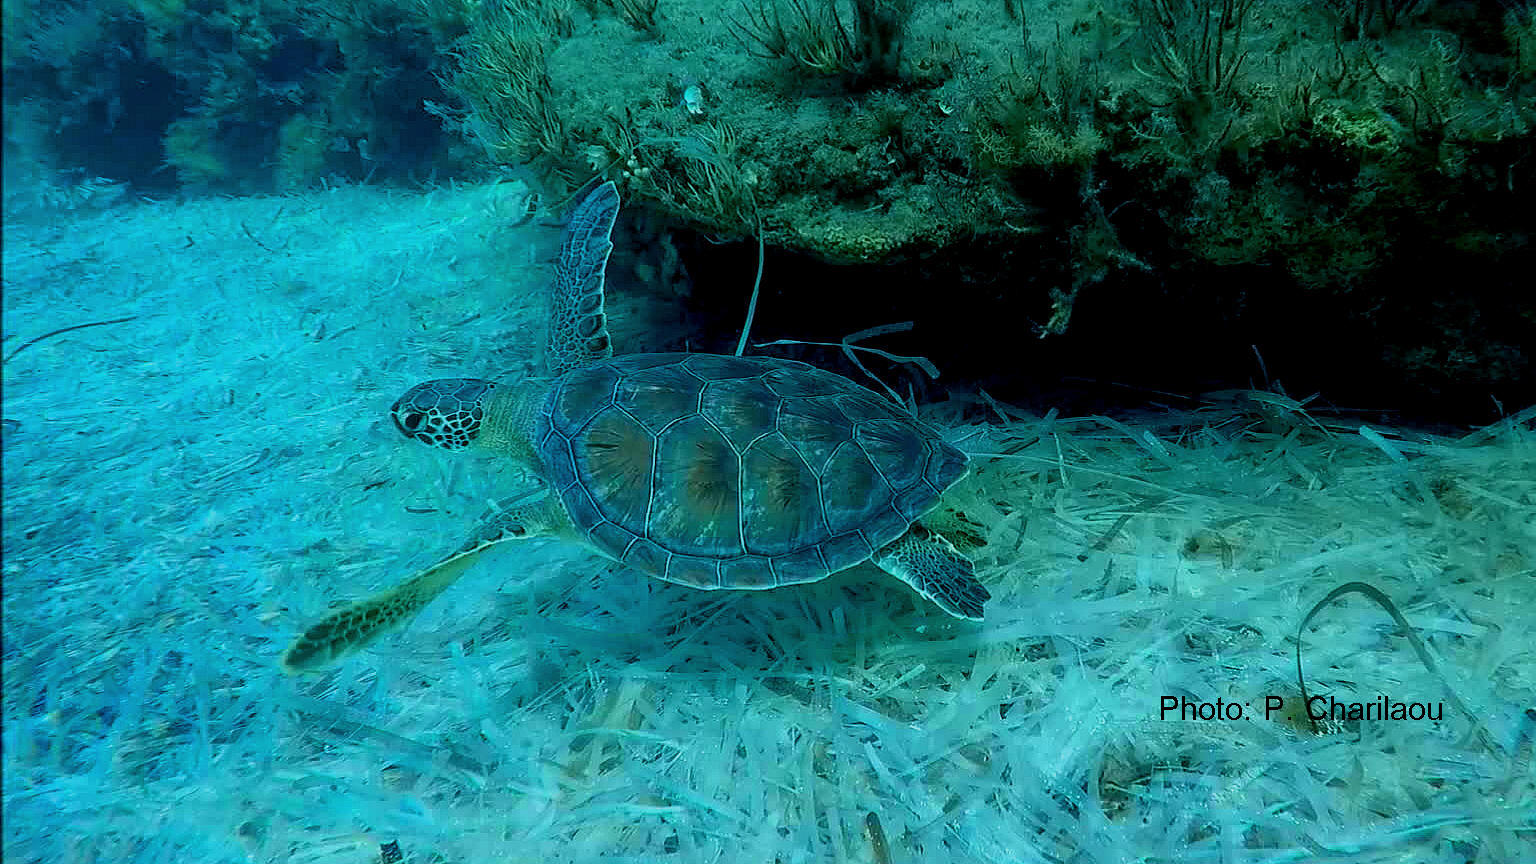 Image shows green sea turtle underwater on the sea bed.